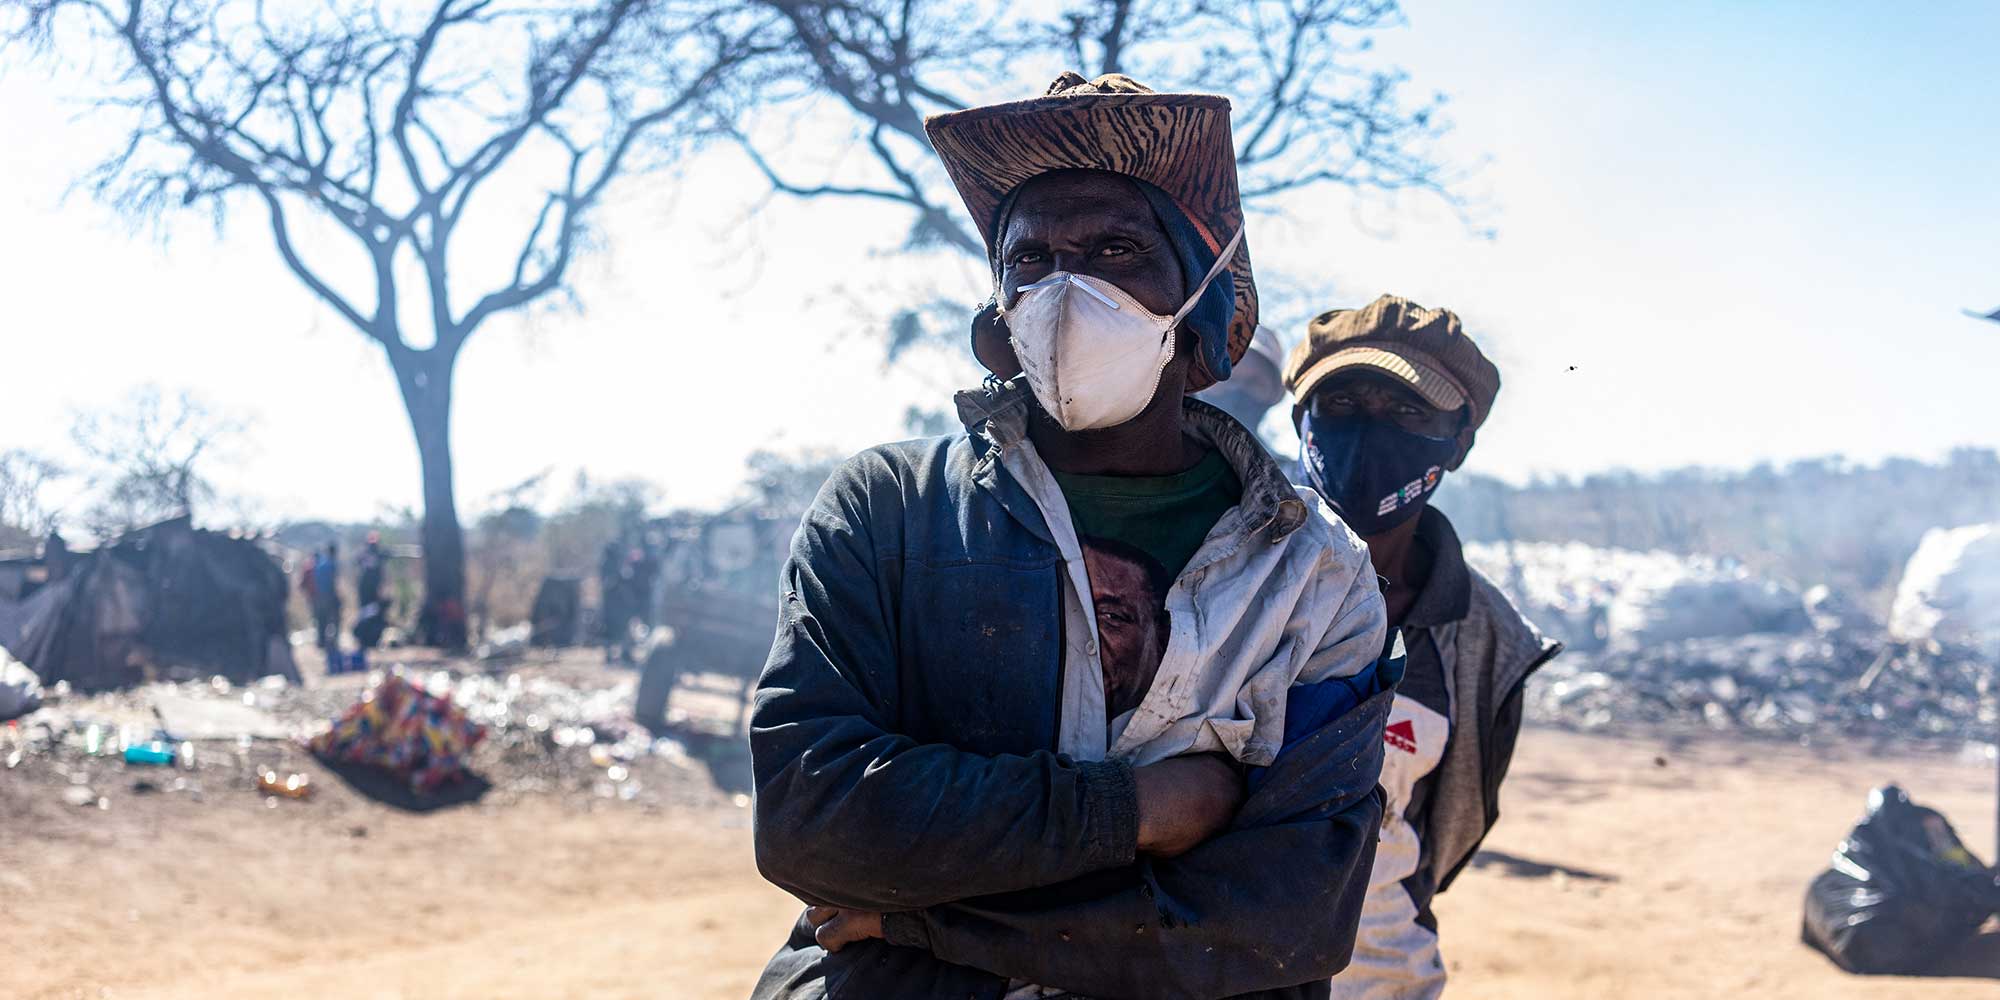 Waste picker Khumbulani Tshuma, 44, impatiently waits his turn to have his first dose of COVID-19 vaccine at Richmond Landfill Site, popularly known as Ngozi Mine, in Zimbabwe’s second city of Bulawayo.